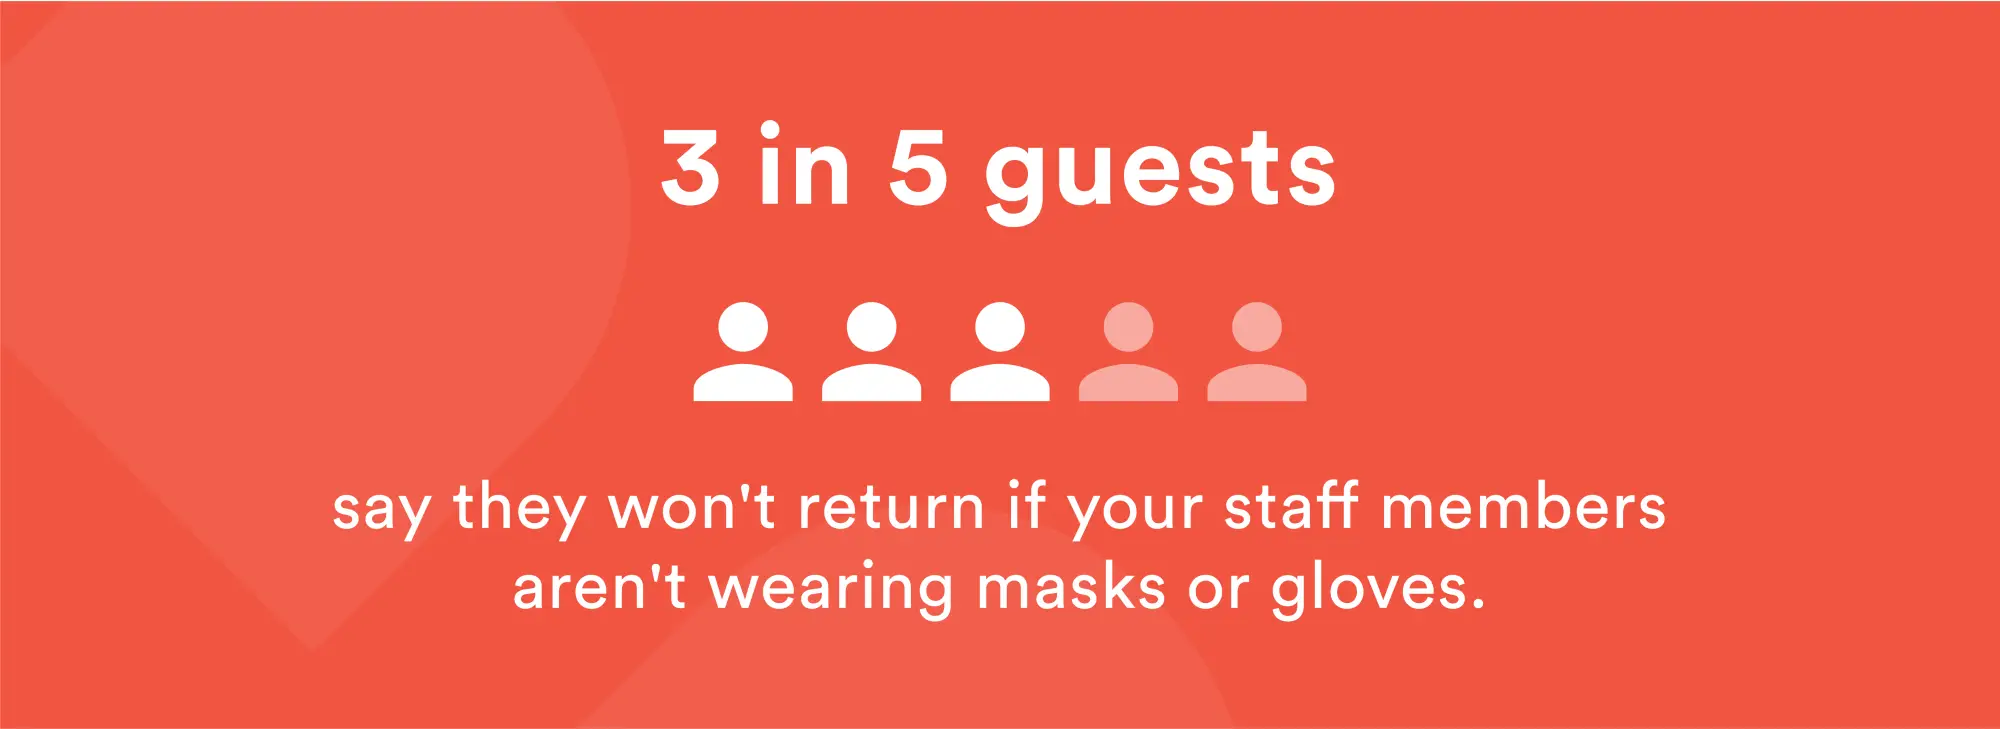 Restaurant Reopening Data: 3 in 5 Guests won't return to a restaurant if staff aren't wearing masks or gloves